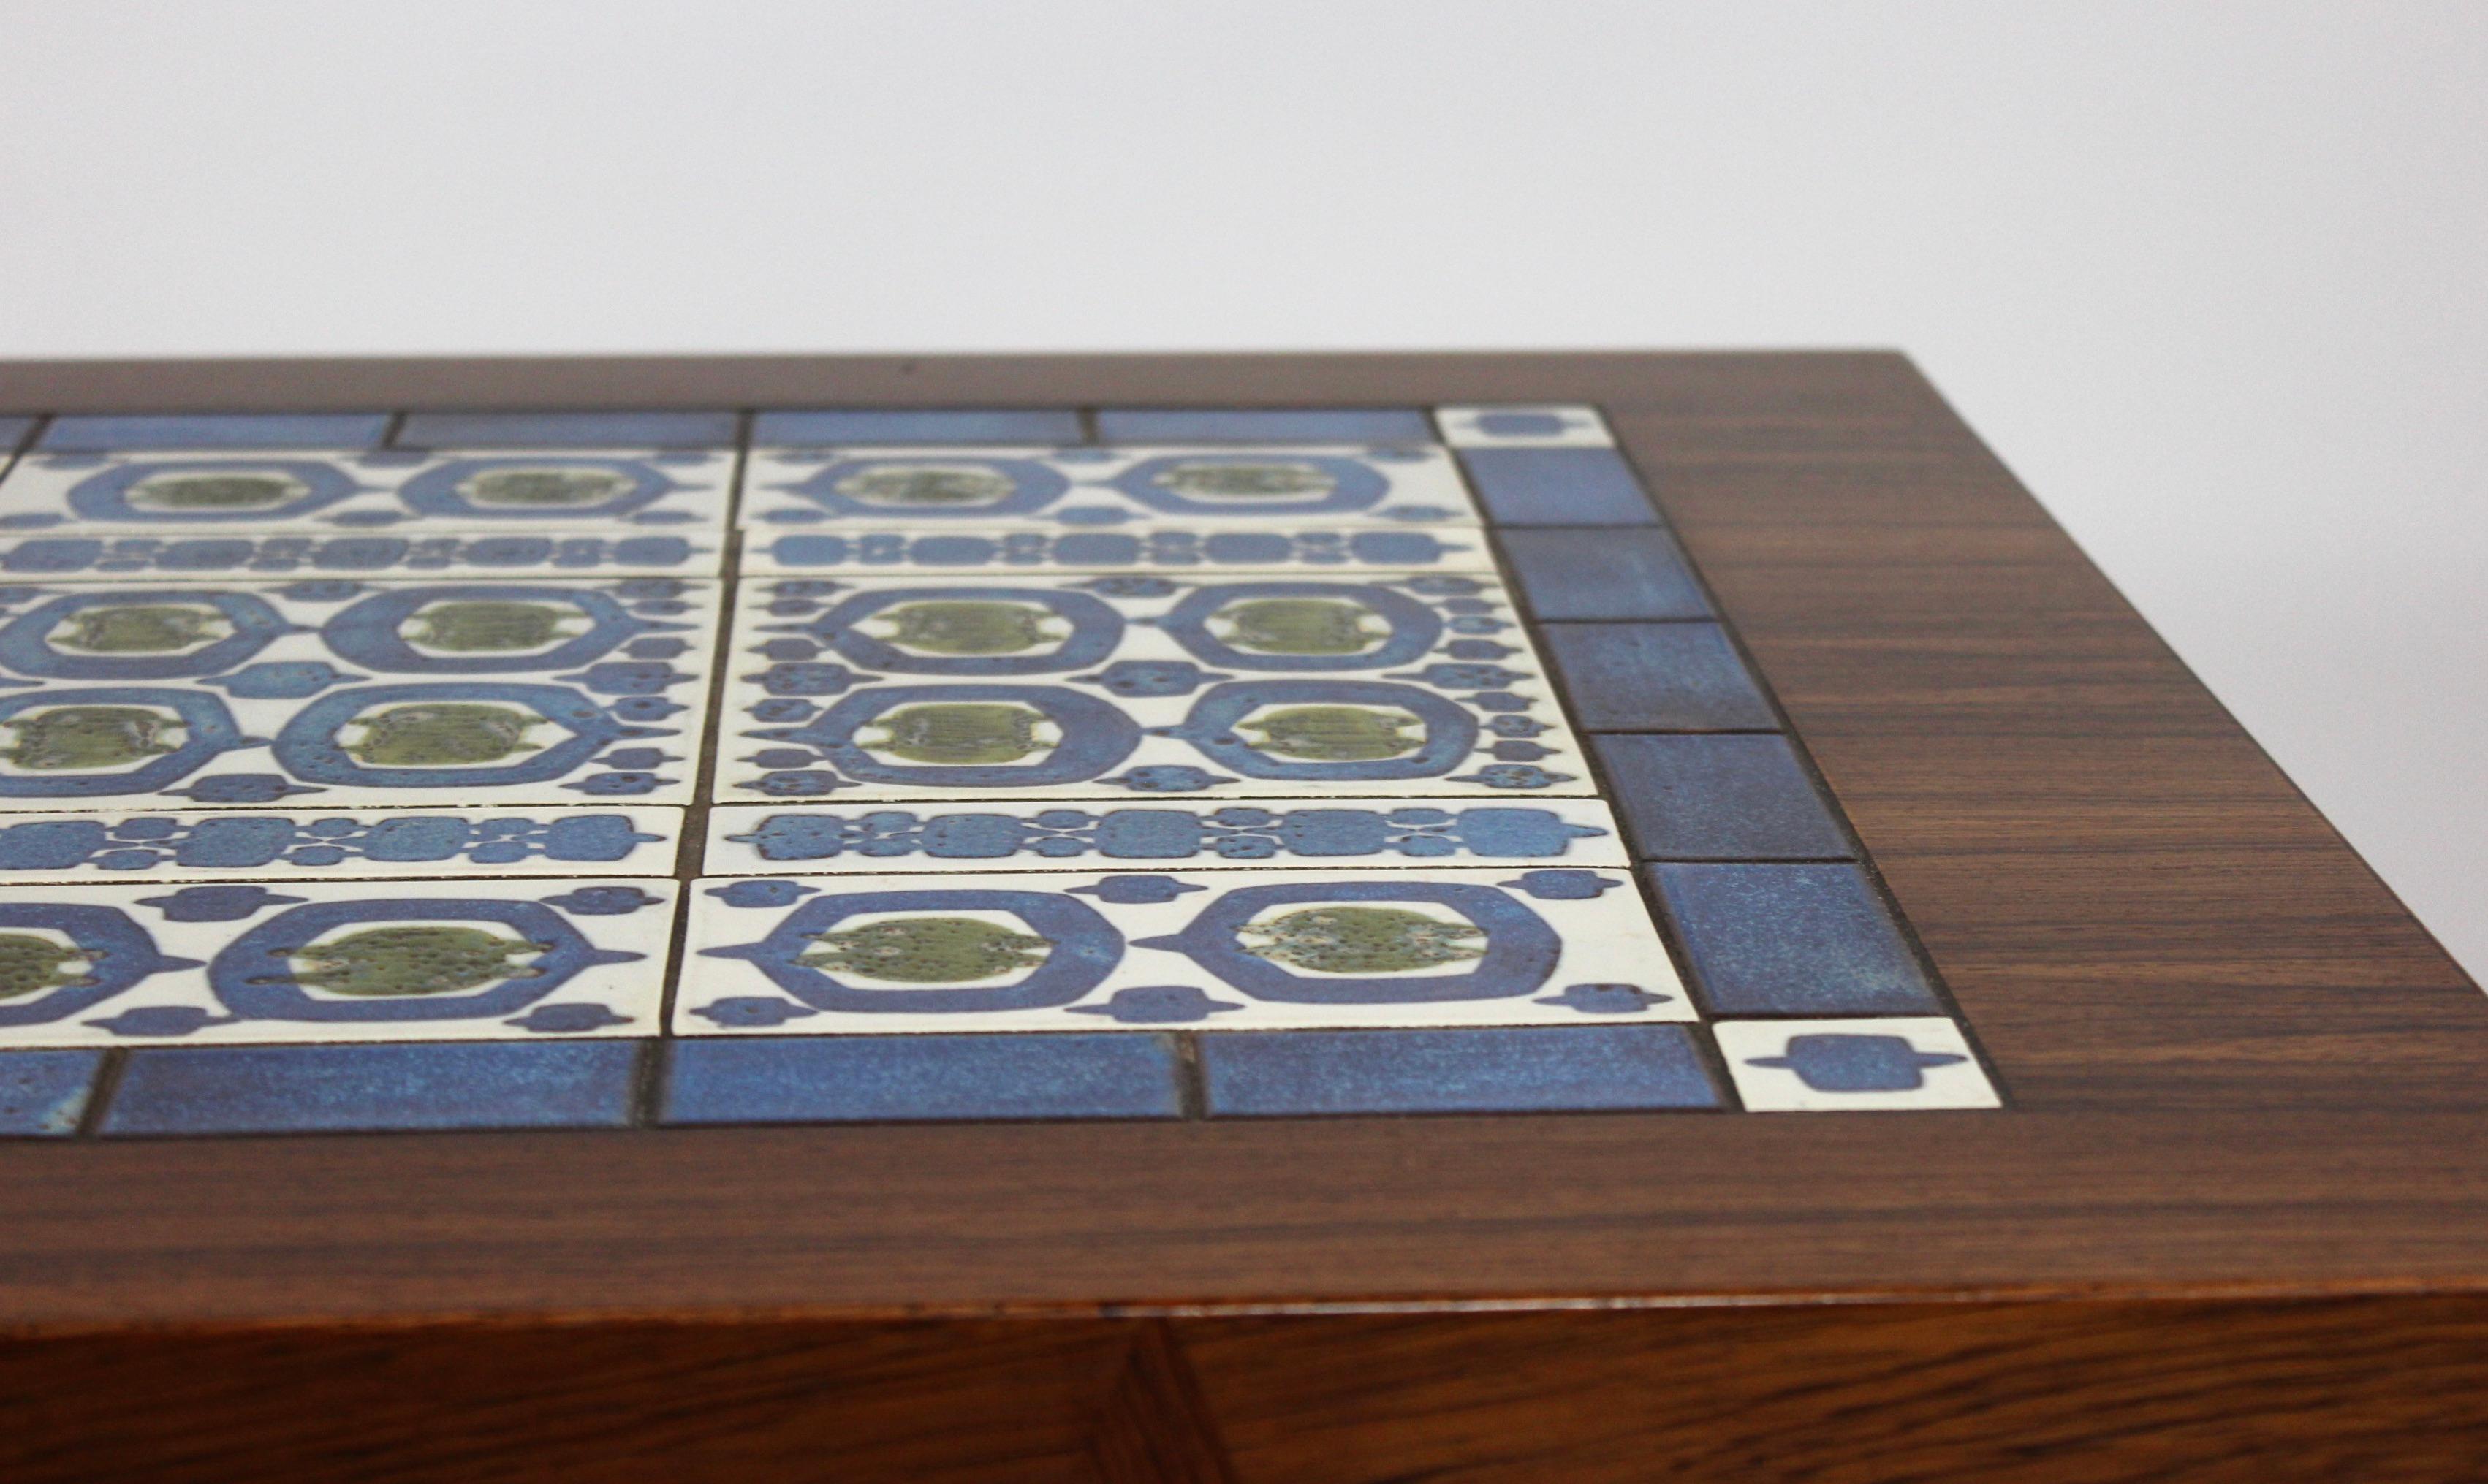 Scandinavian Modern Coffee Table of Rosewood and Dark Blue Tiles, by Severin Hansen for Haslev